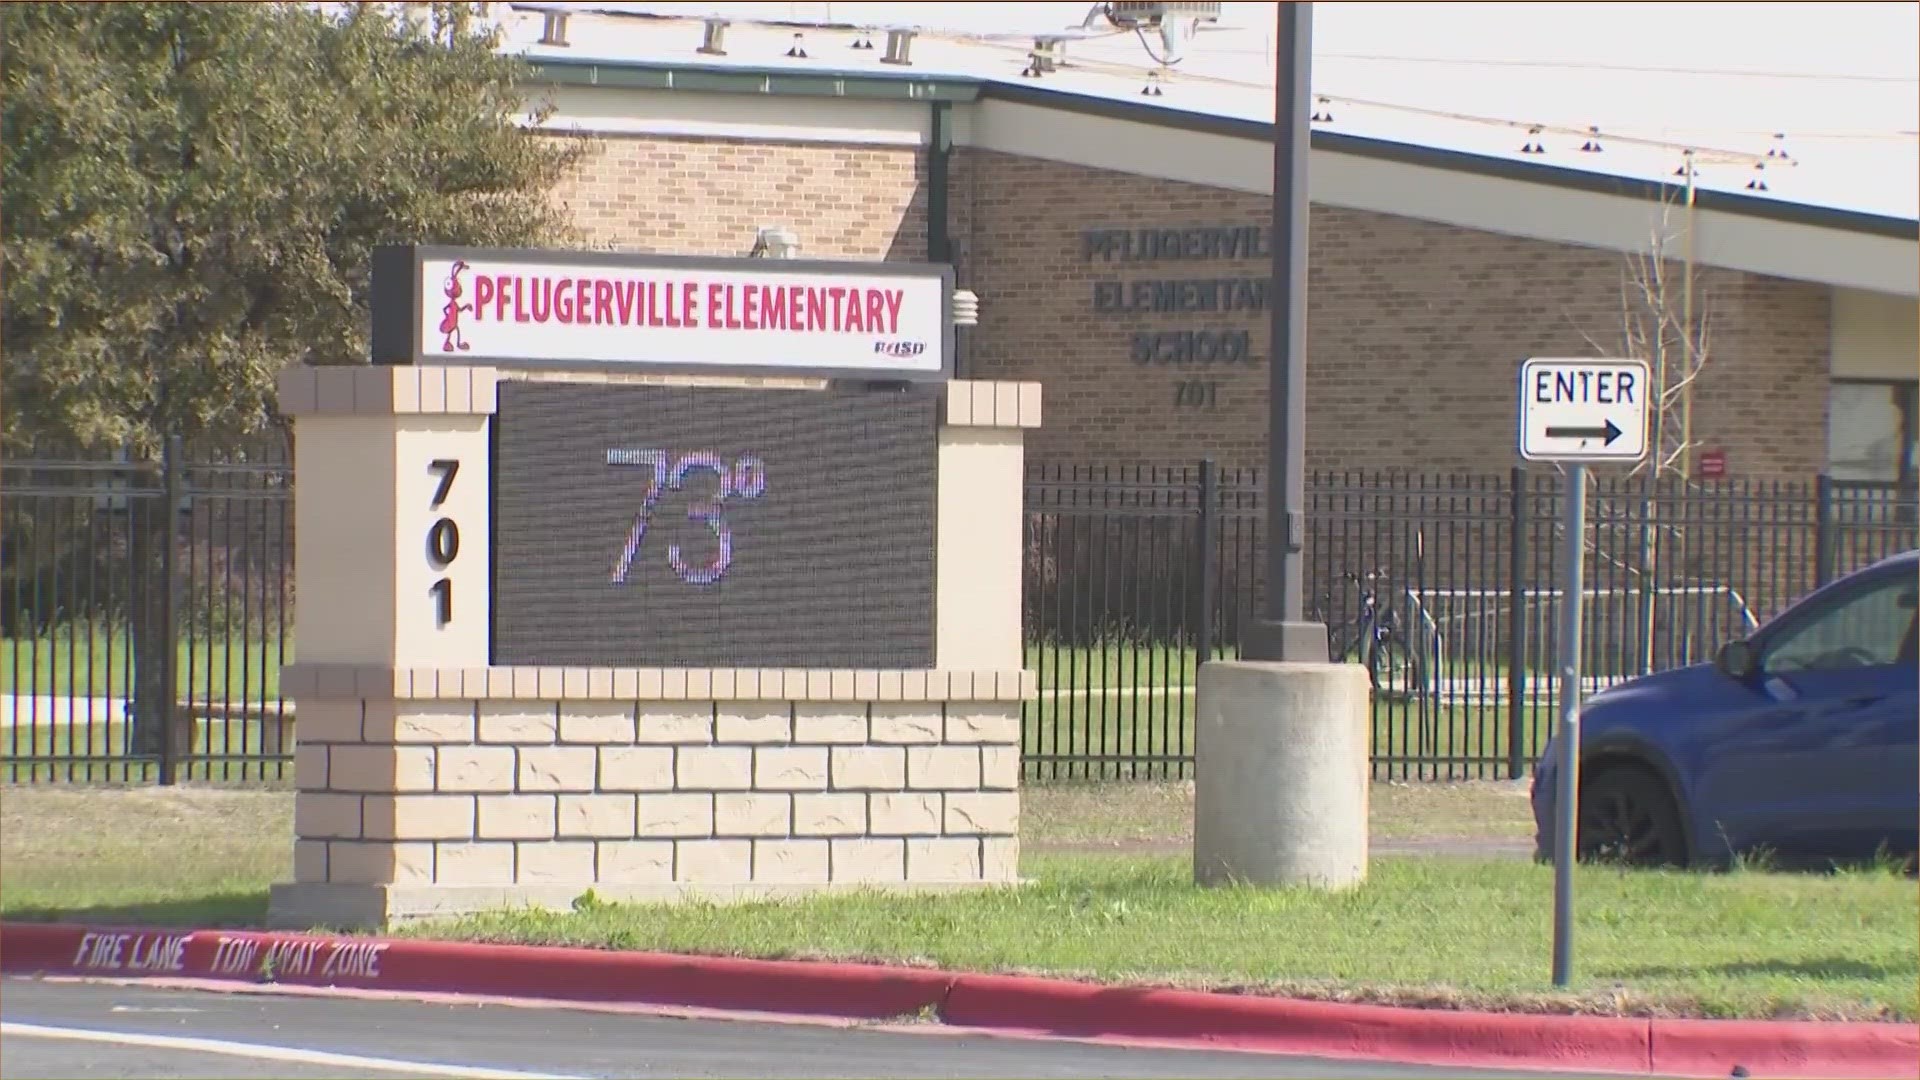 A new state law requires all school districts to have an armed guard on every campus during school hours. Pflugerville ISD has claimed an exemption to the law.